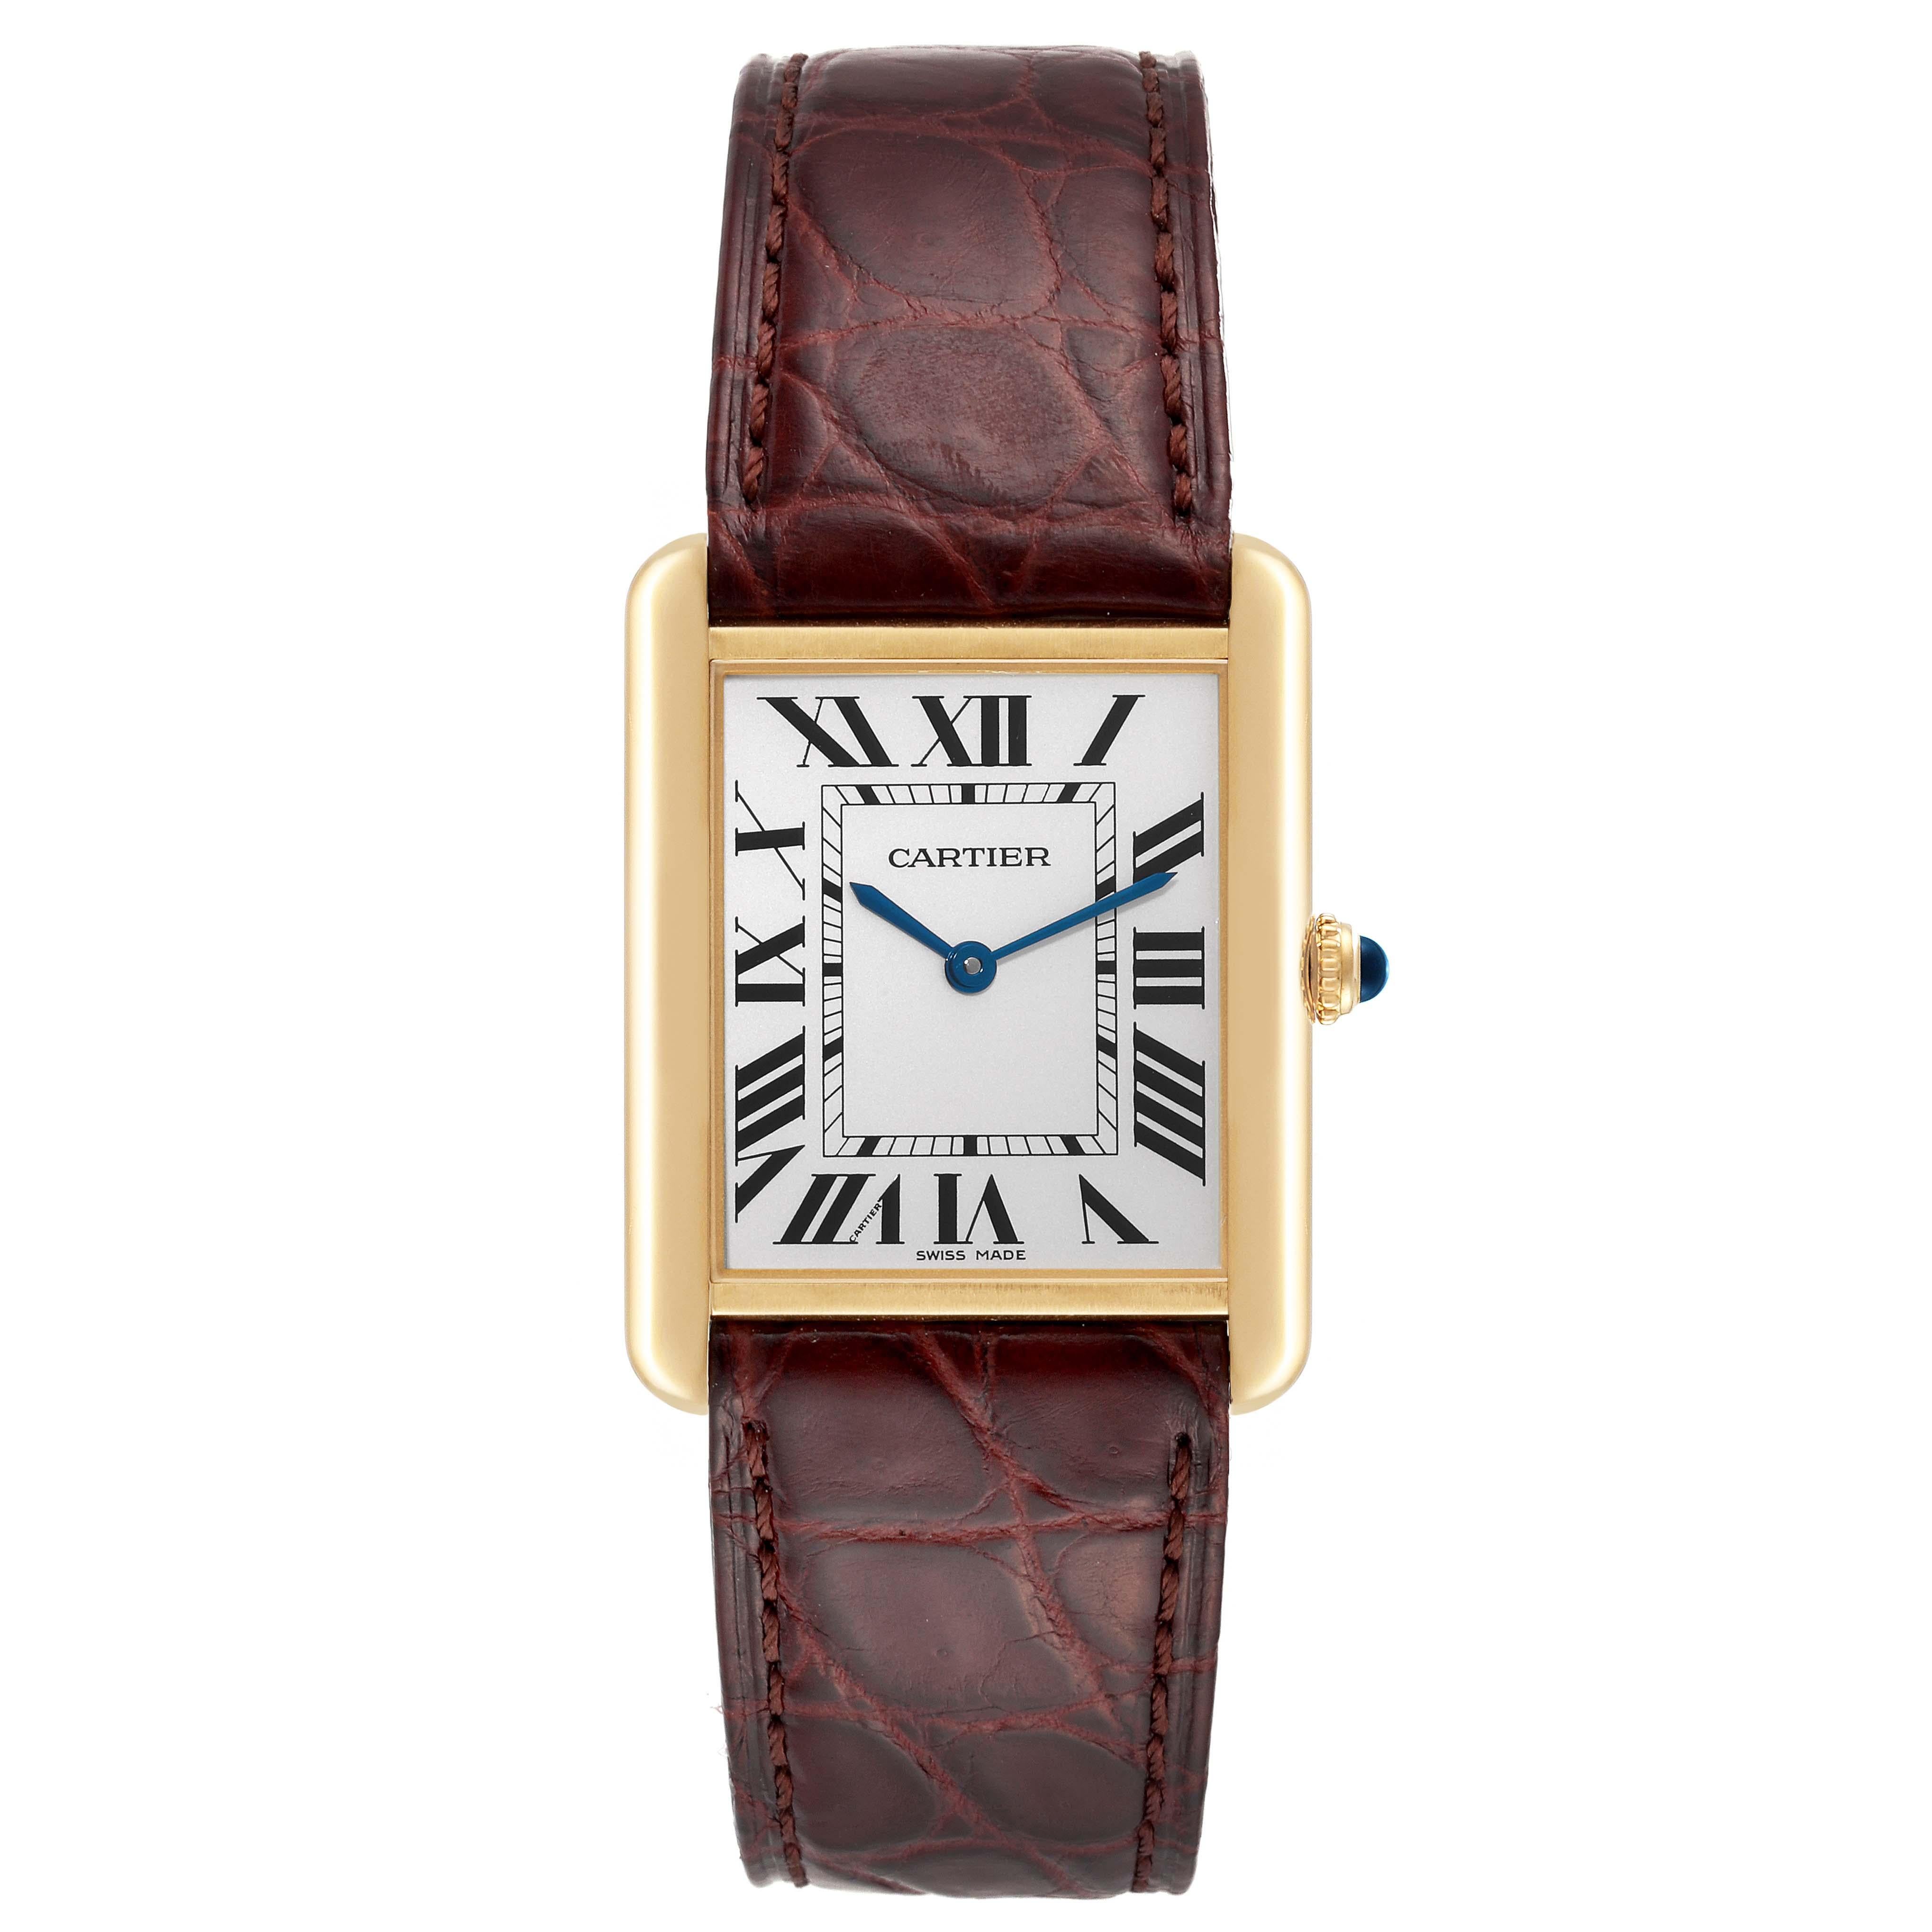 Cartier Tank Solo Yellow Gold Steel Brown Strap Mens Watch W1018855. Quartz movement. 18k yellow gold case 34.0 x 27.0 mm. Stainless steel caseback. Circular grained crown set with a blue spinel cabochon. . Scratch resistant sapphire crystal. Silver